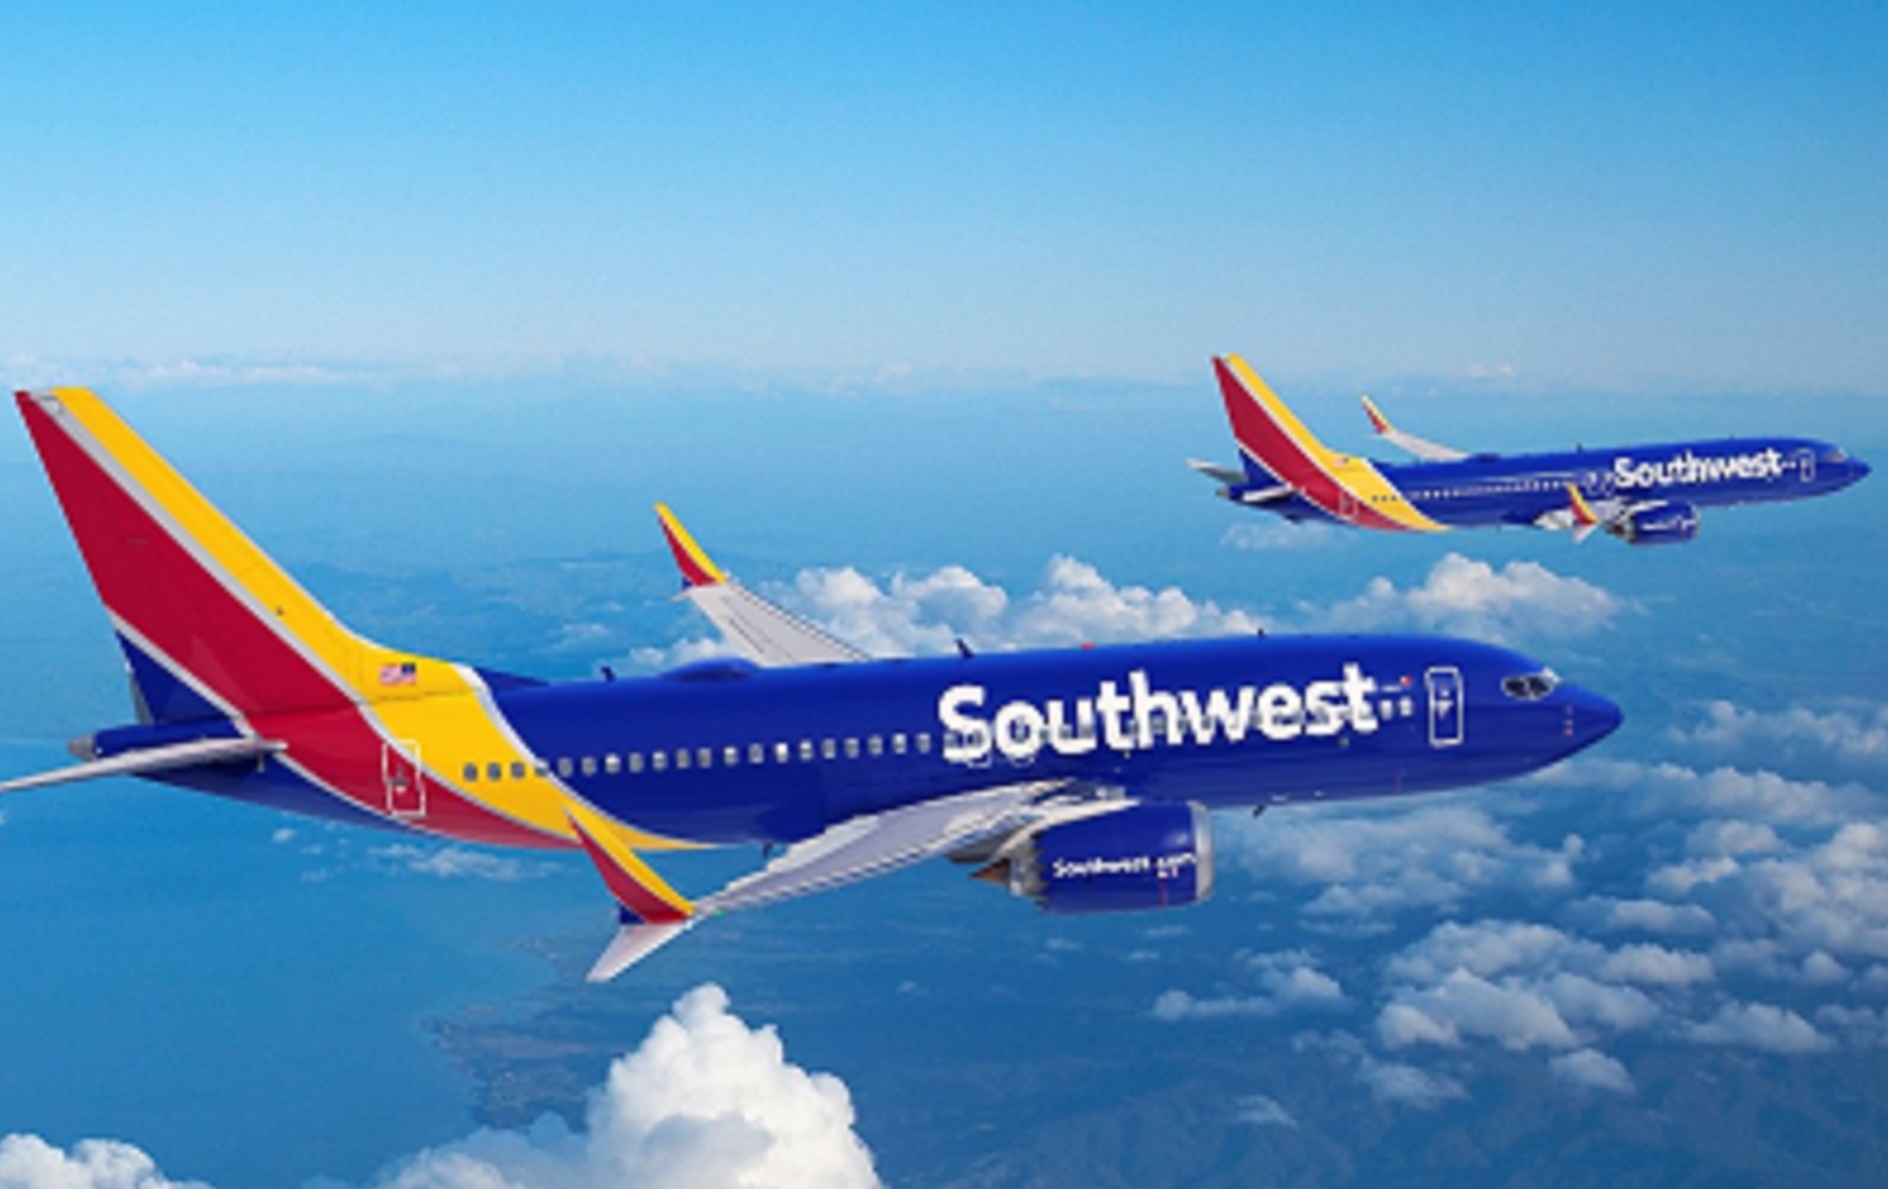 Southwest Airlines has ordered 100 Boeing 737 MAX planes with 155 options across two models, the -7 and -8. Click to enlarge.